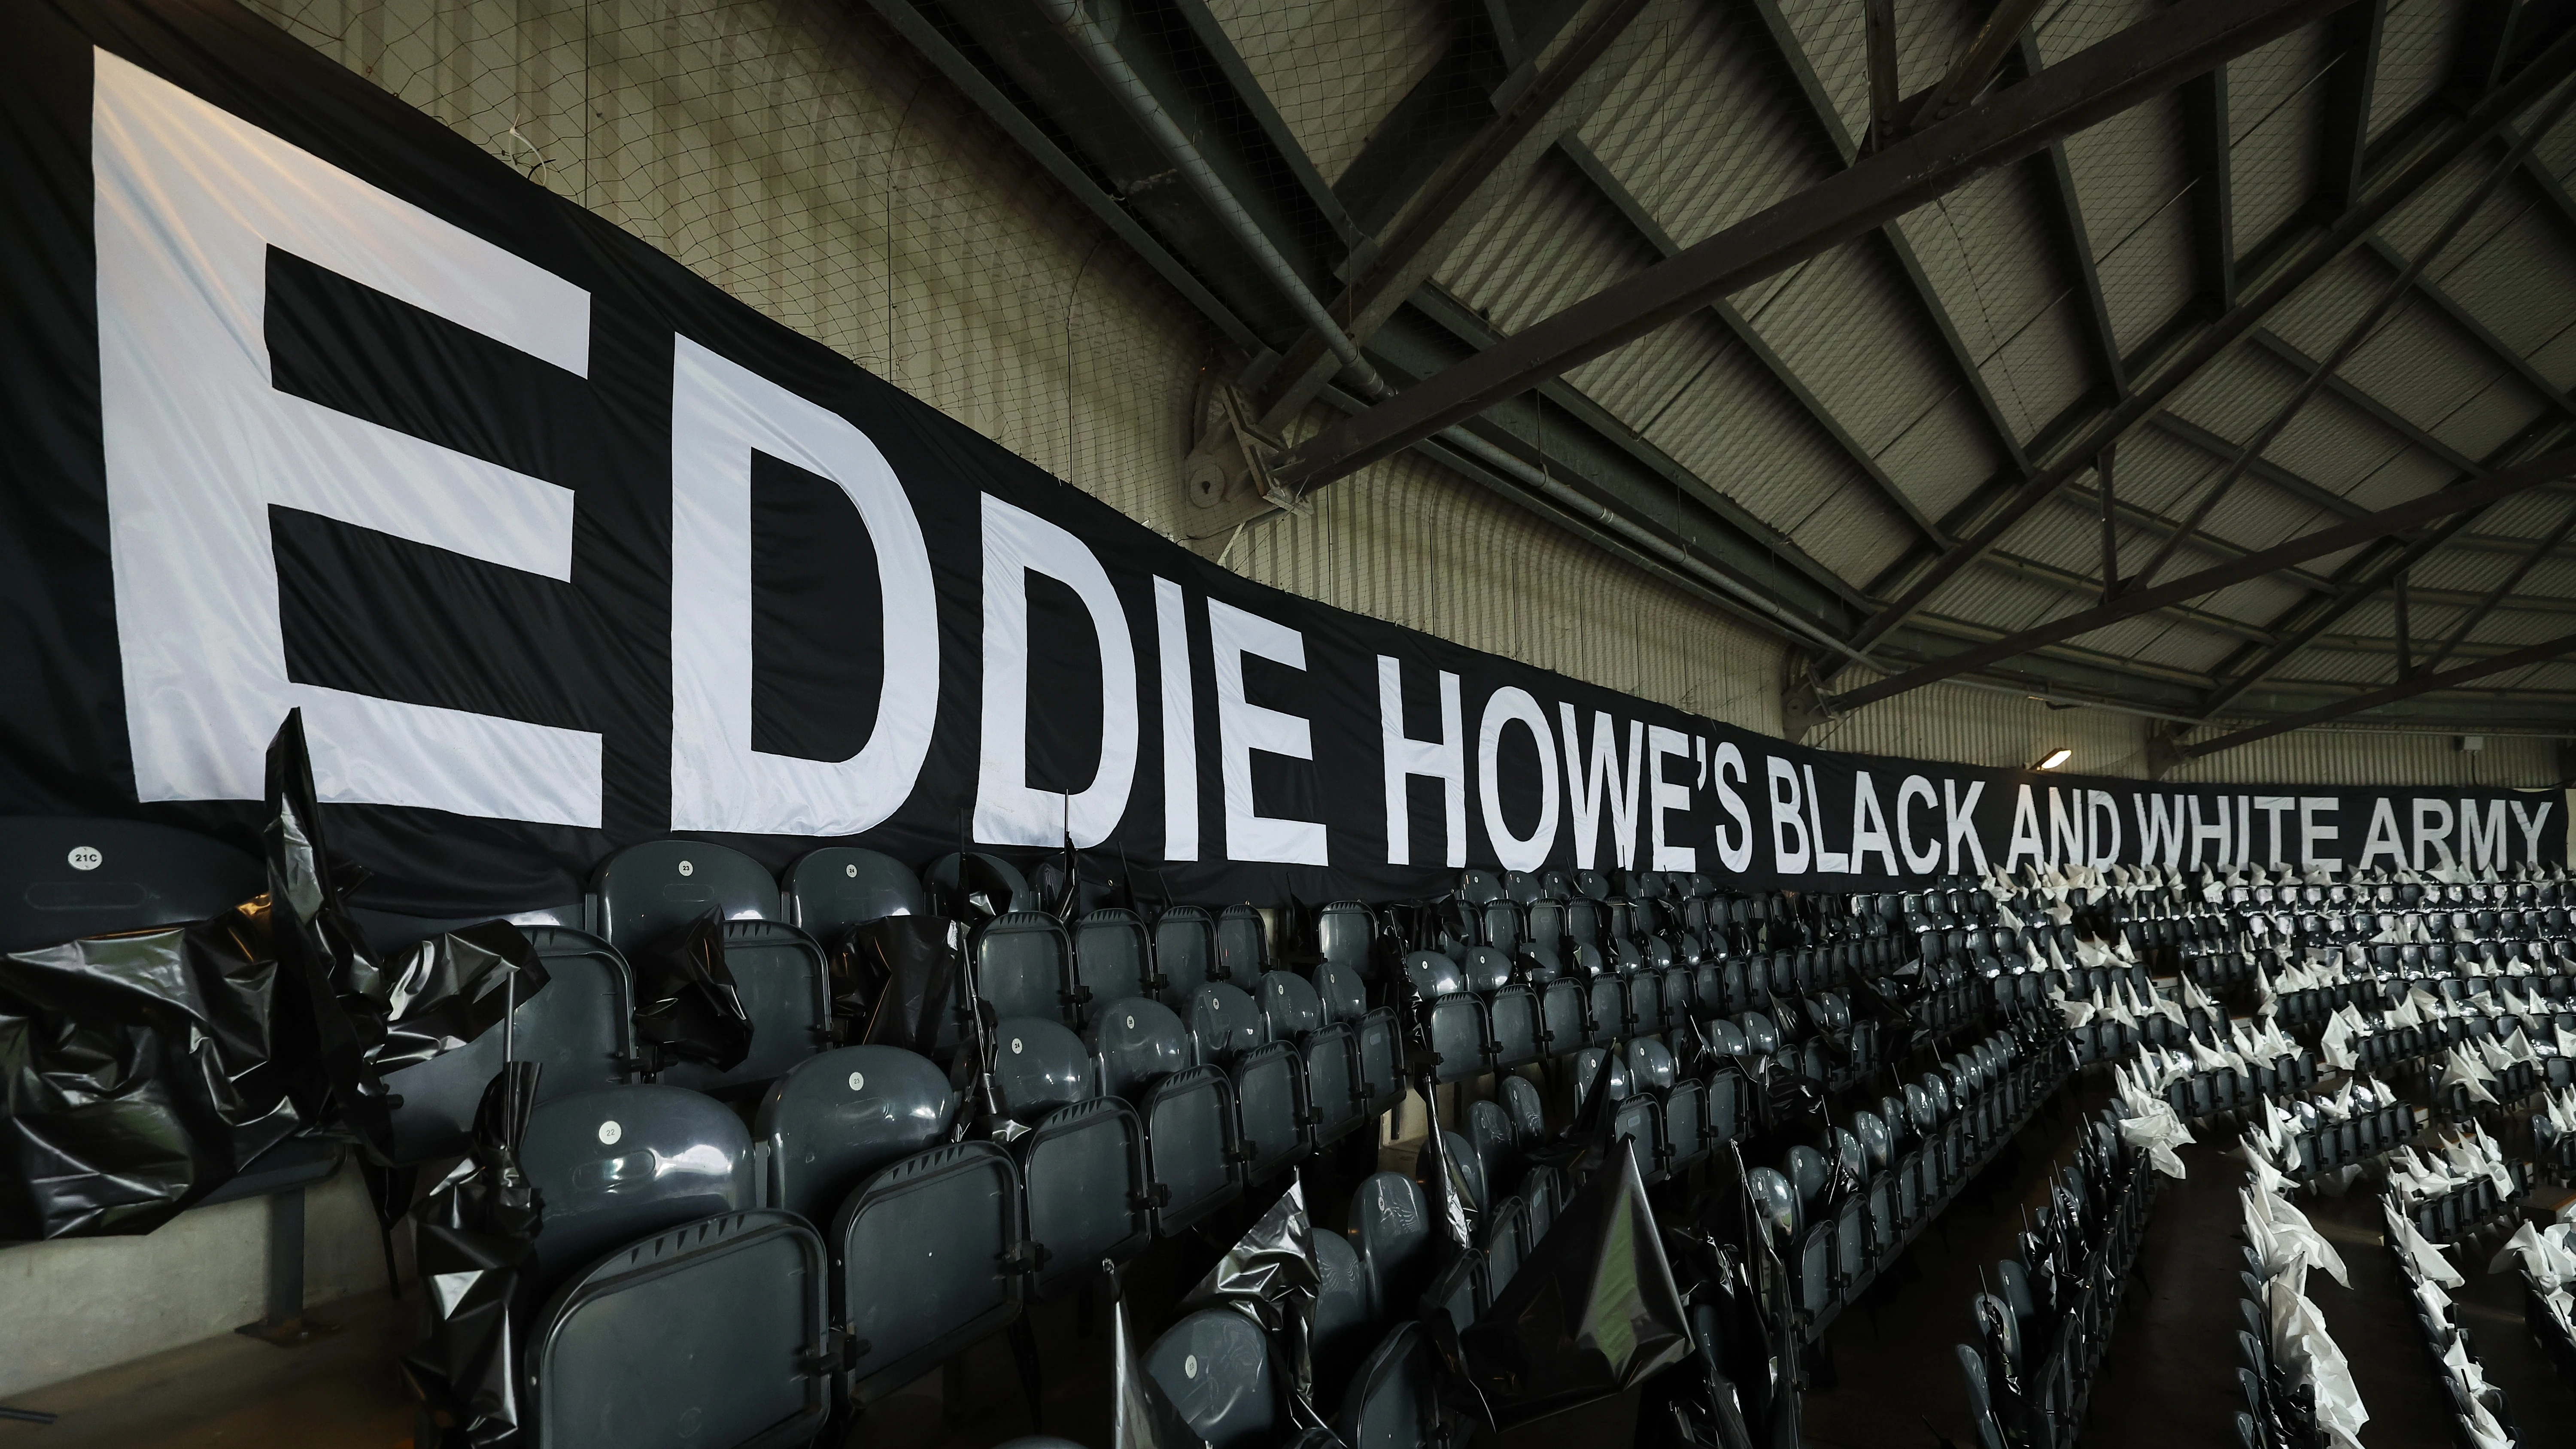 eddie-howes-black-and-white-army-banner